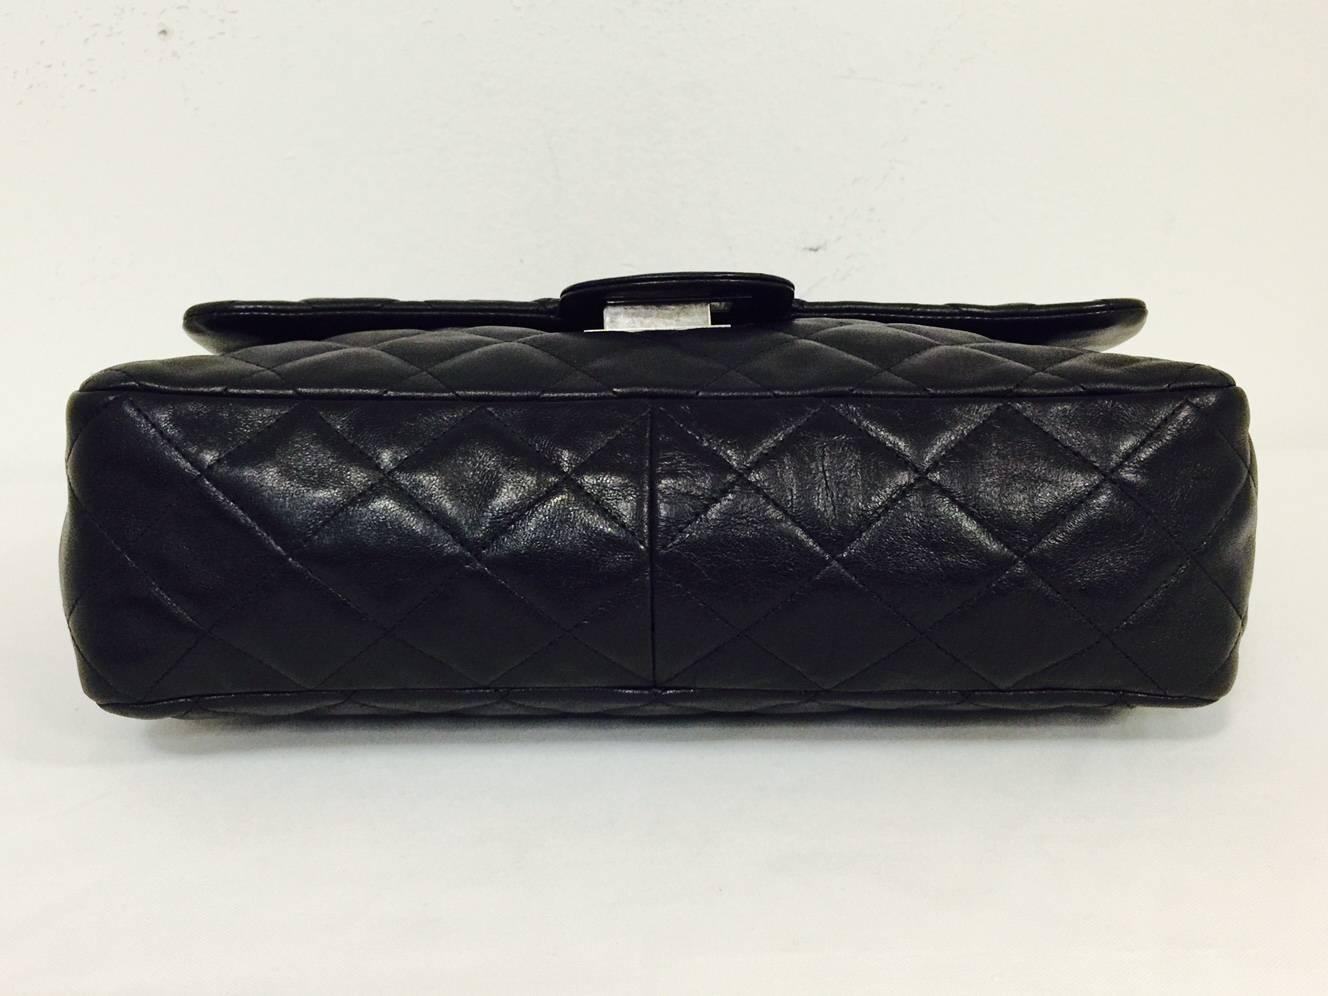 Chanel 2.55 Reissue Bag Size 226 in Black Quilted Lambskin For Sale 1